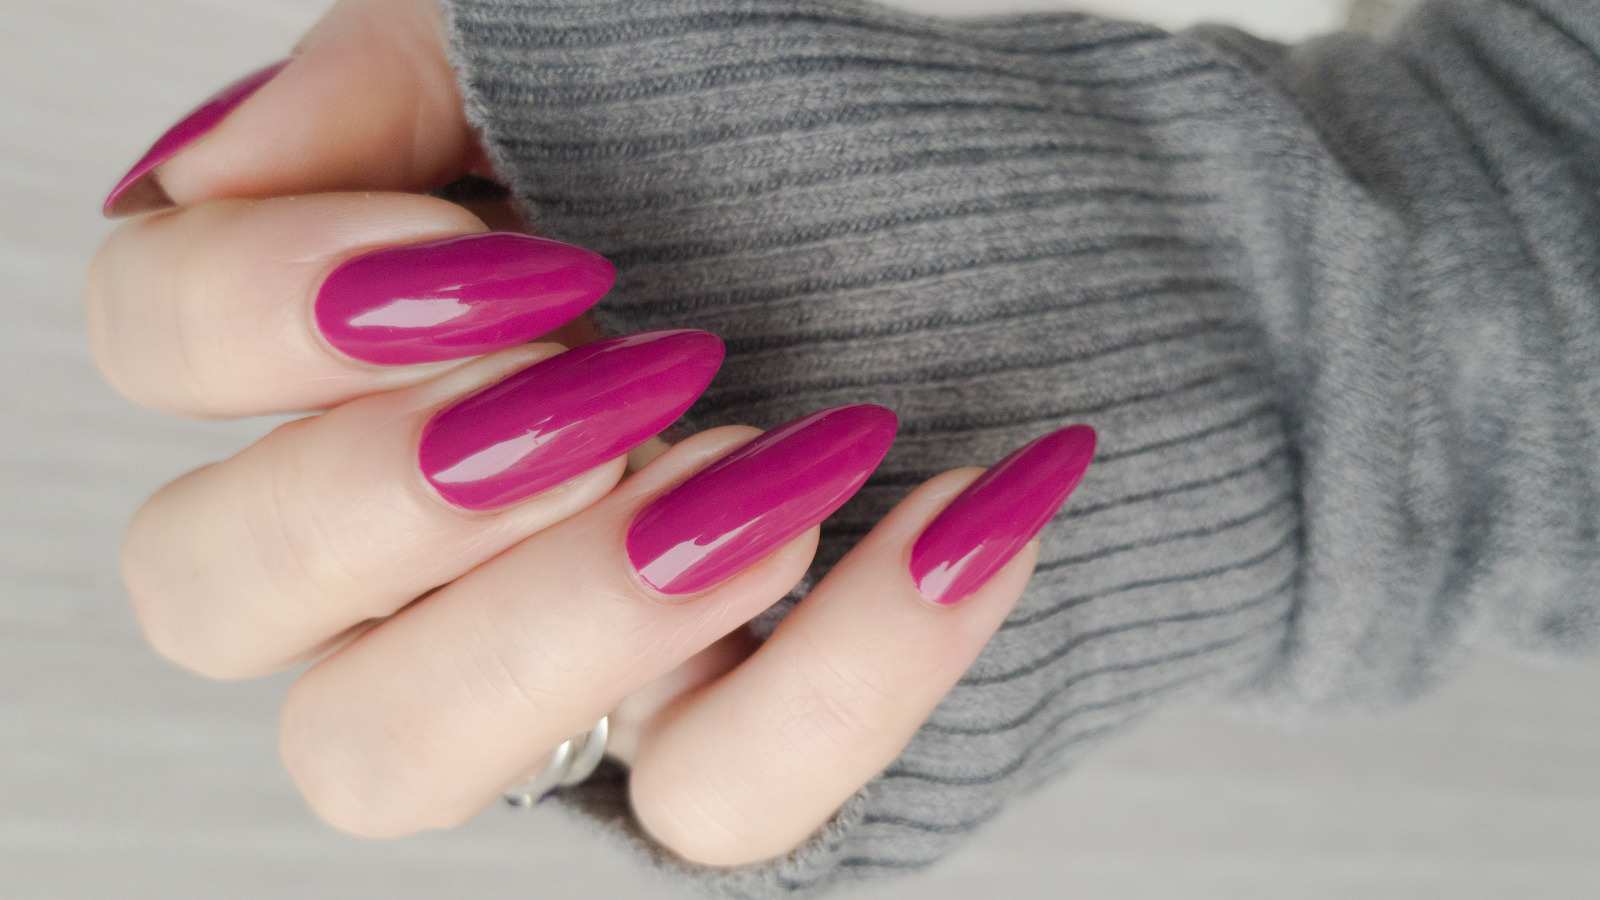 Here's What Really Happens If You Wear Artificial Nails For Too Long